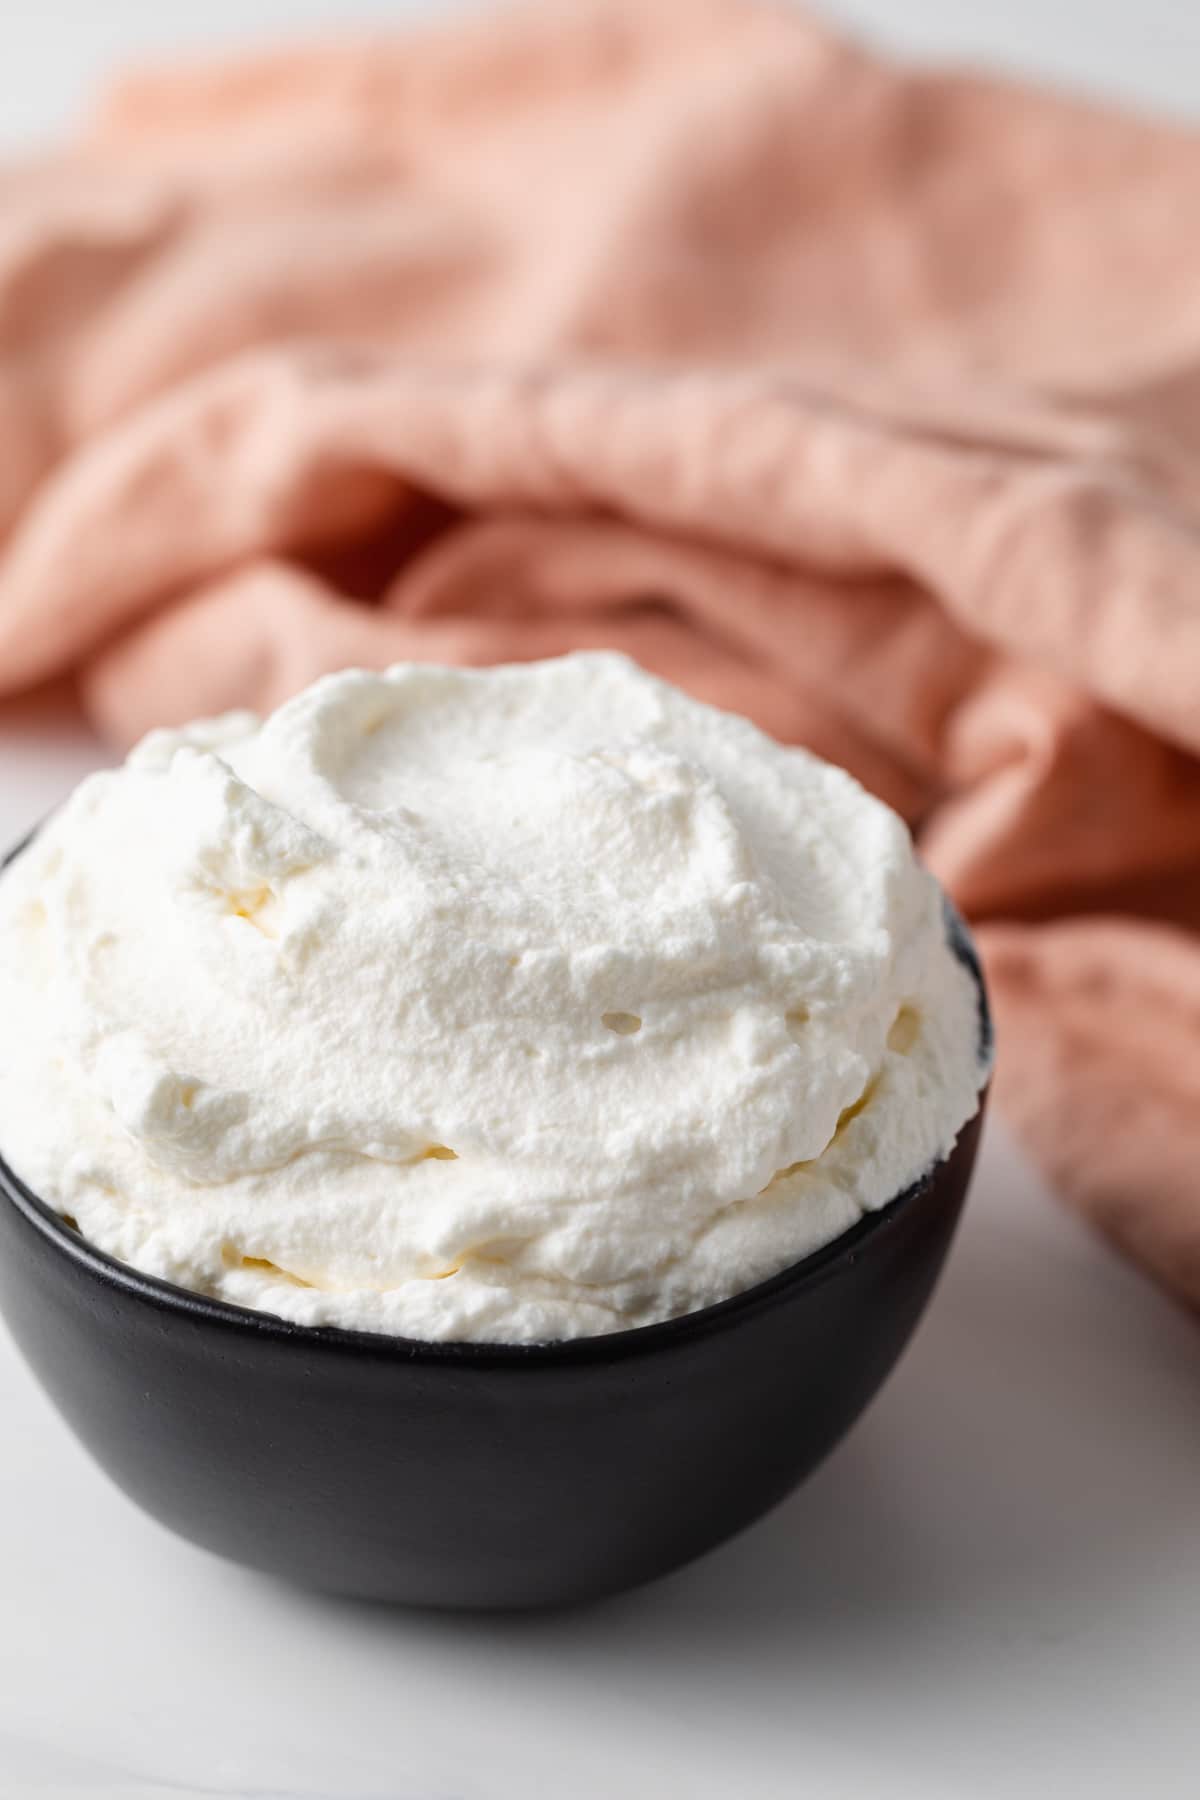 whipped cream in black bowl with peach colored napkin in background